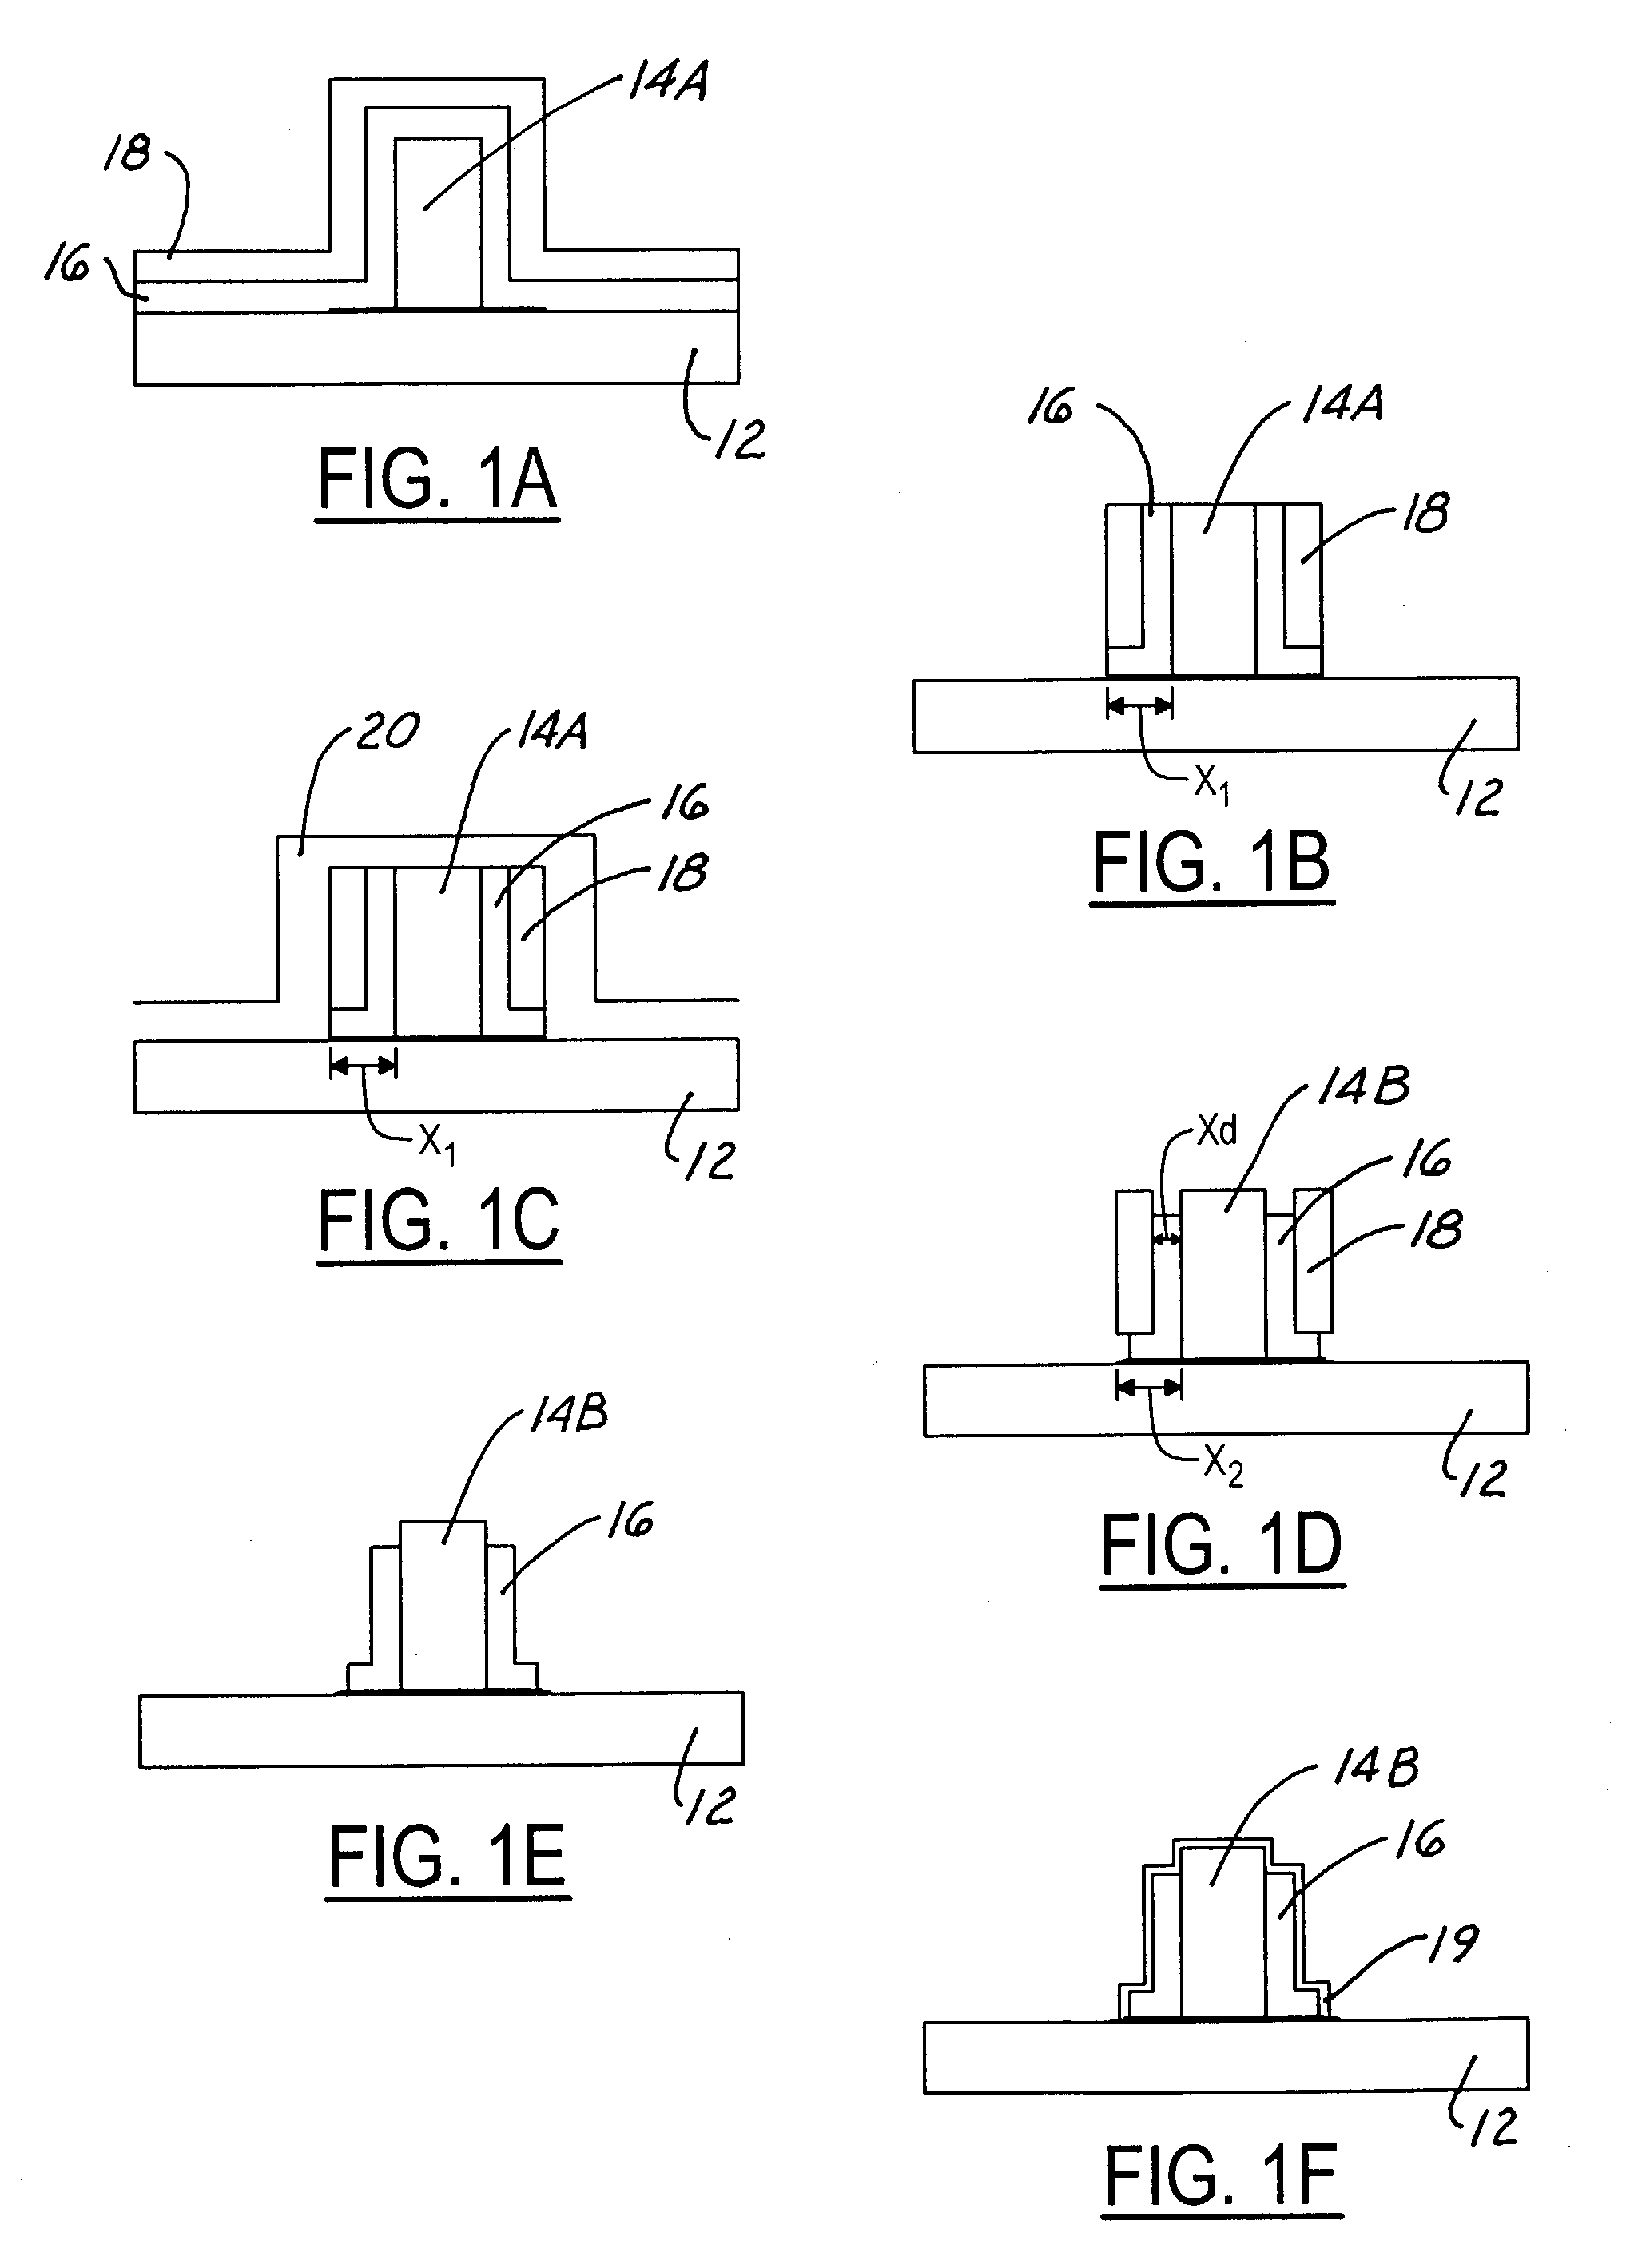 Method for multiple spacer width control